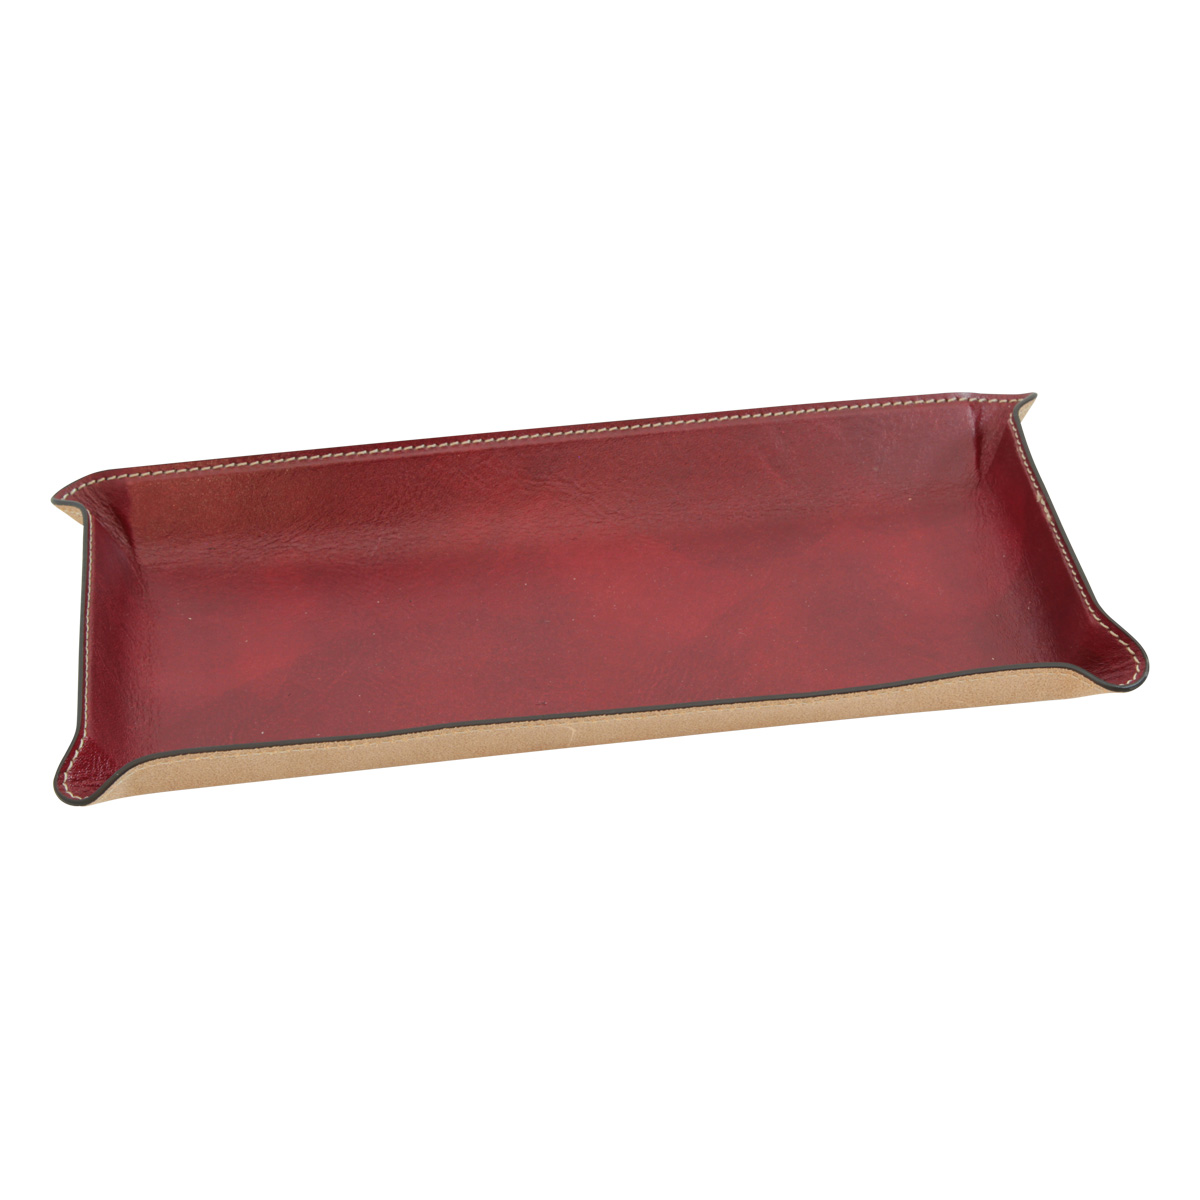 Leather desk tray - red | 762089RO | EURO | Old Angler Firenze